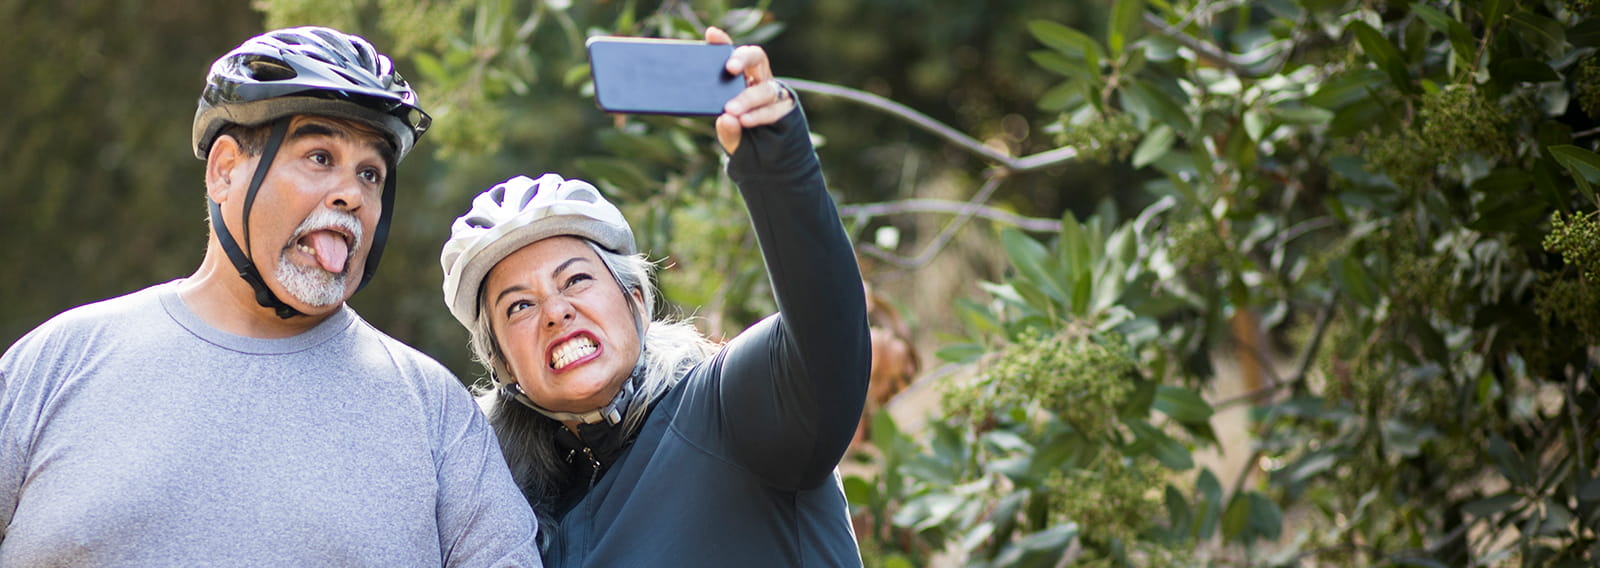 Older couple excersizing and taking a goofy selfie